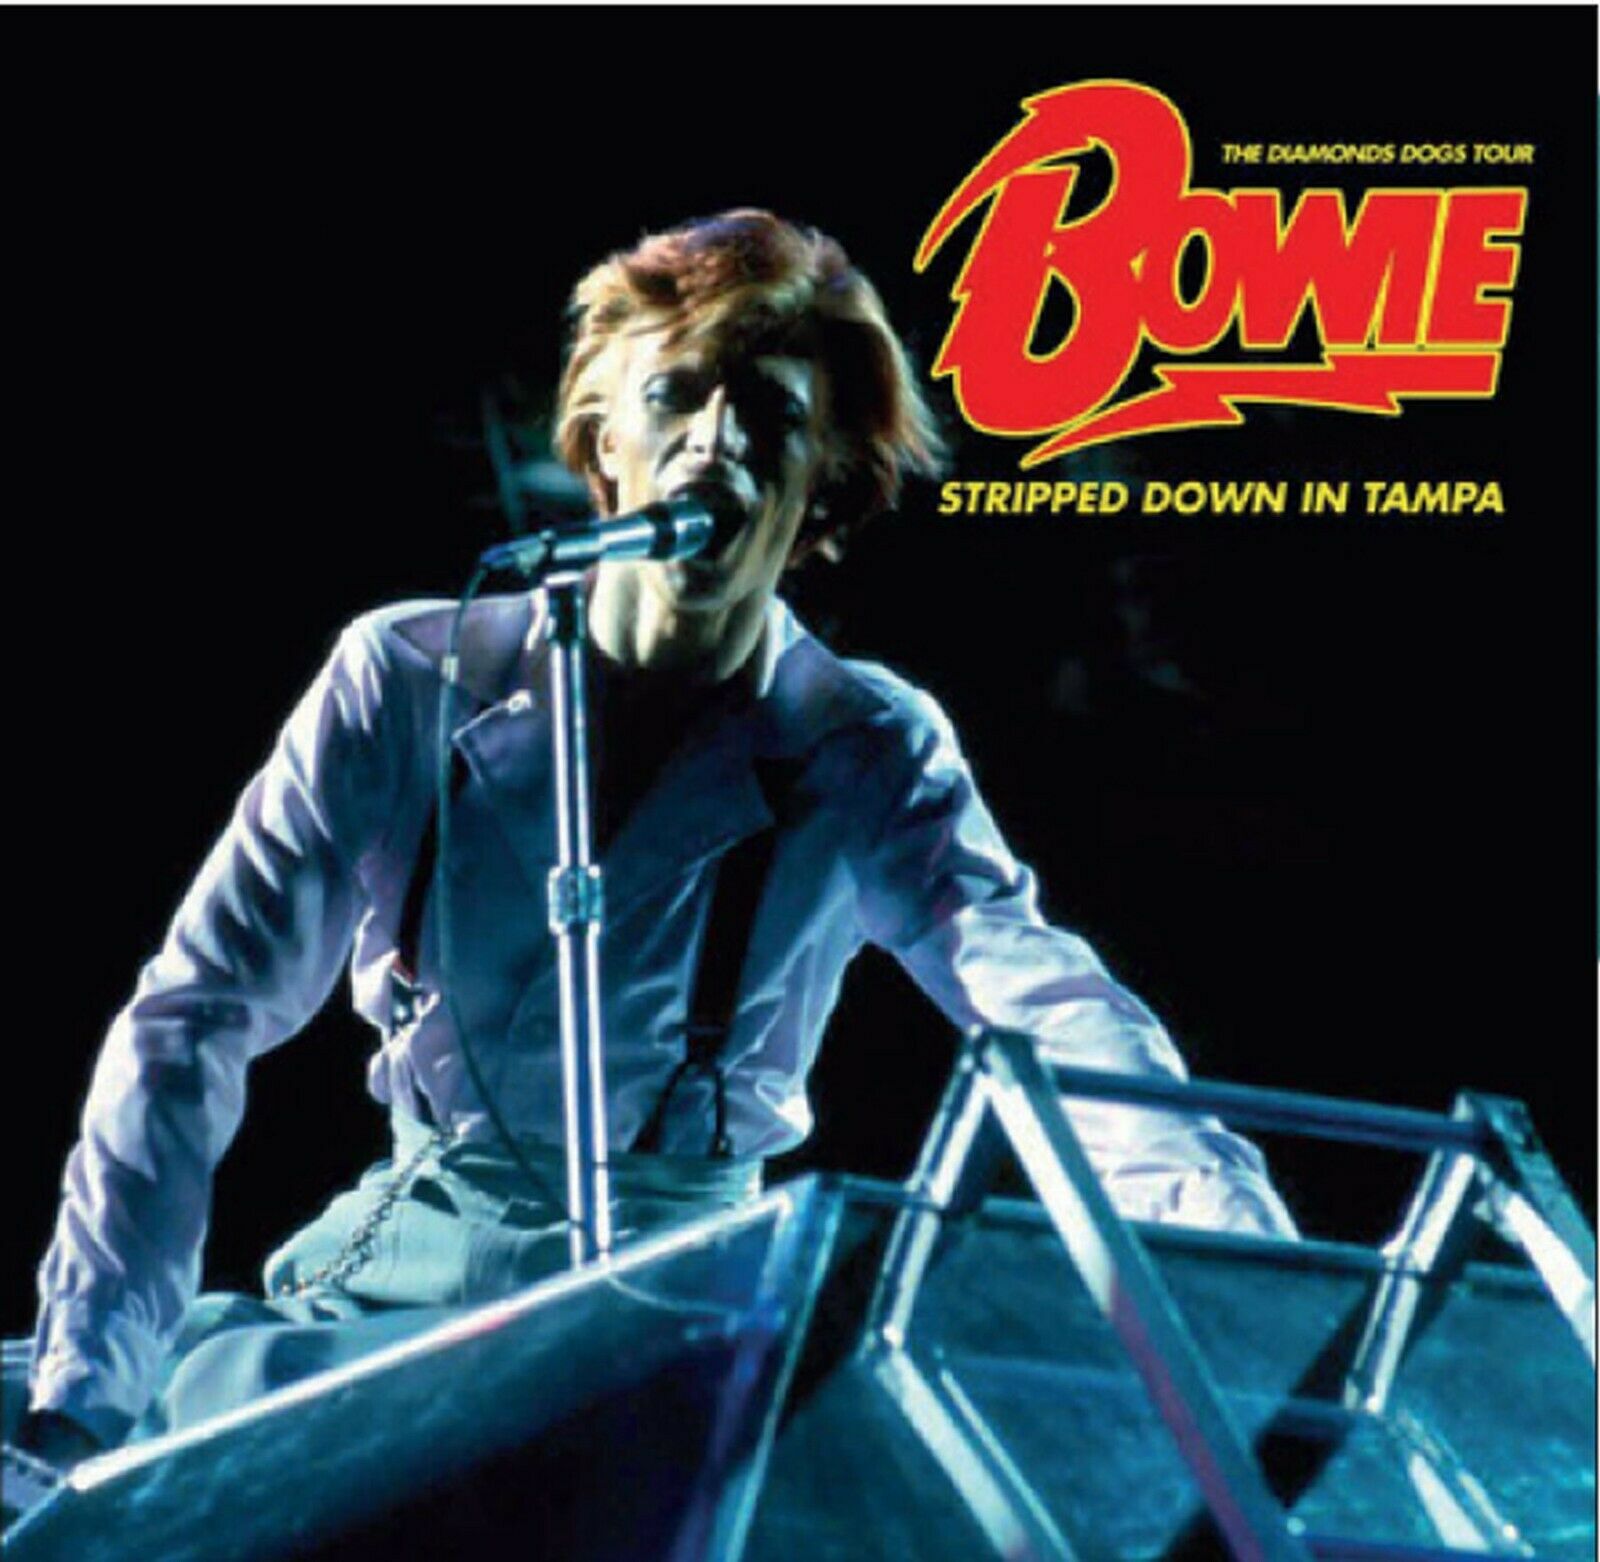 BOWIE DAVID - STRIPPED DOWN IN TAMPA, JULY 2, 1974 - NUMBERED & COLORED VINYL 